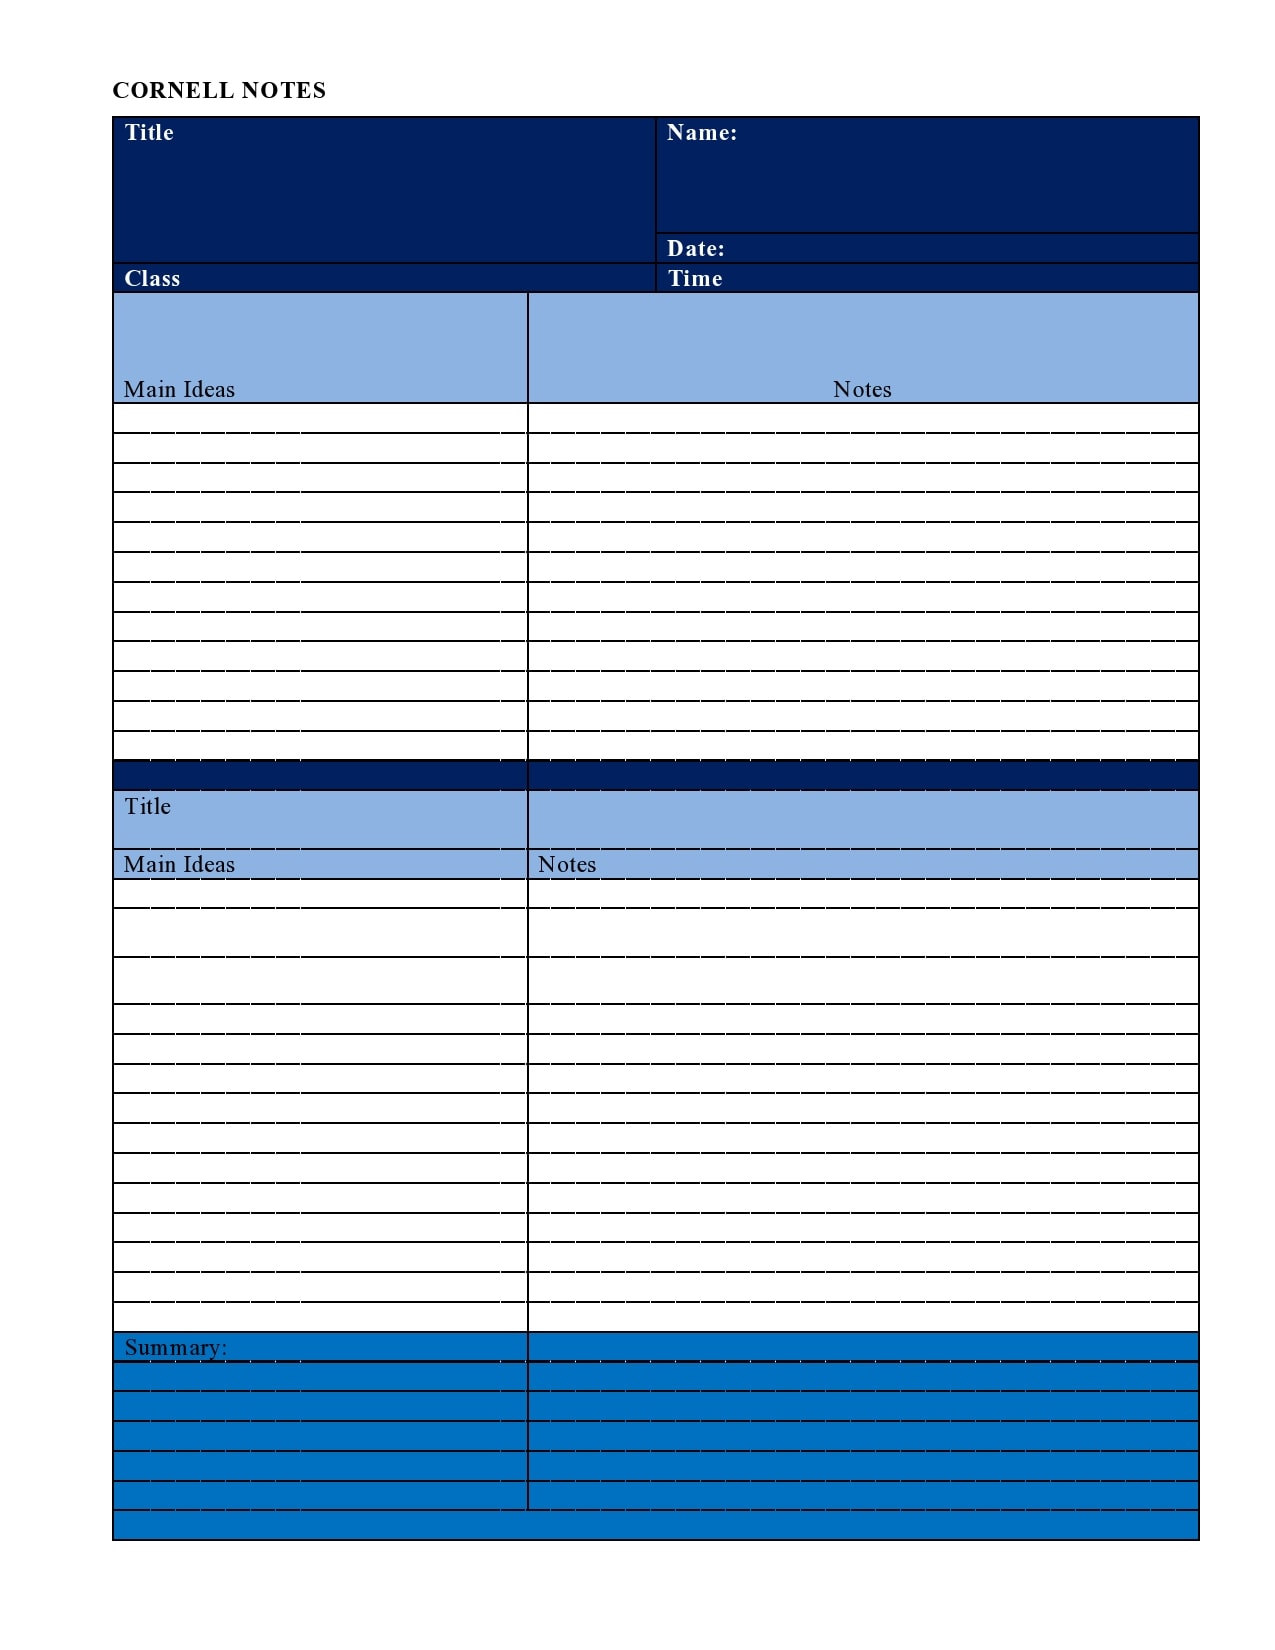 Download Cornell Note Template from templatearchive.com